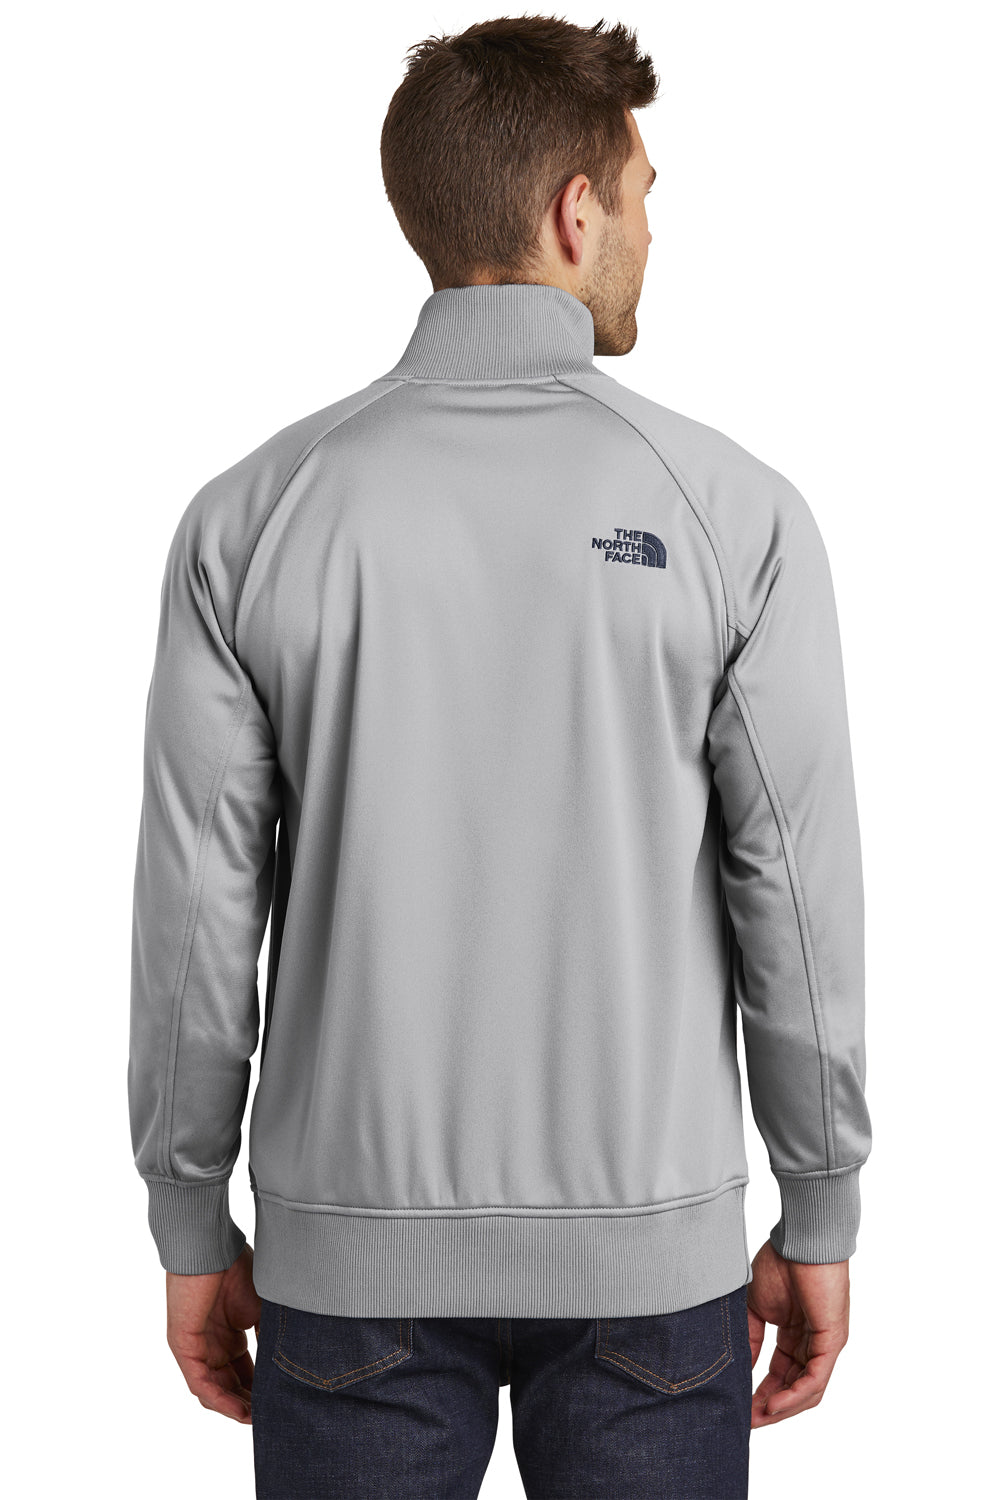 The North Face NF0A3SEW Mens Tech Full Zip Fleece Jacket Mid Grey/Navy Blue Back